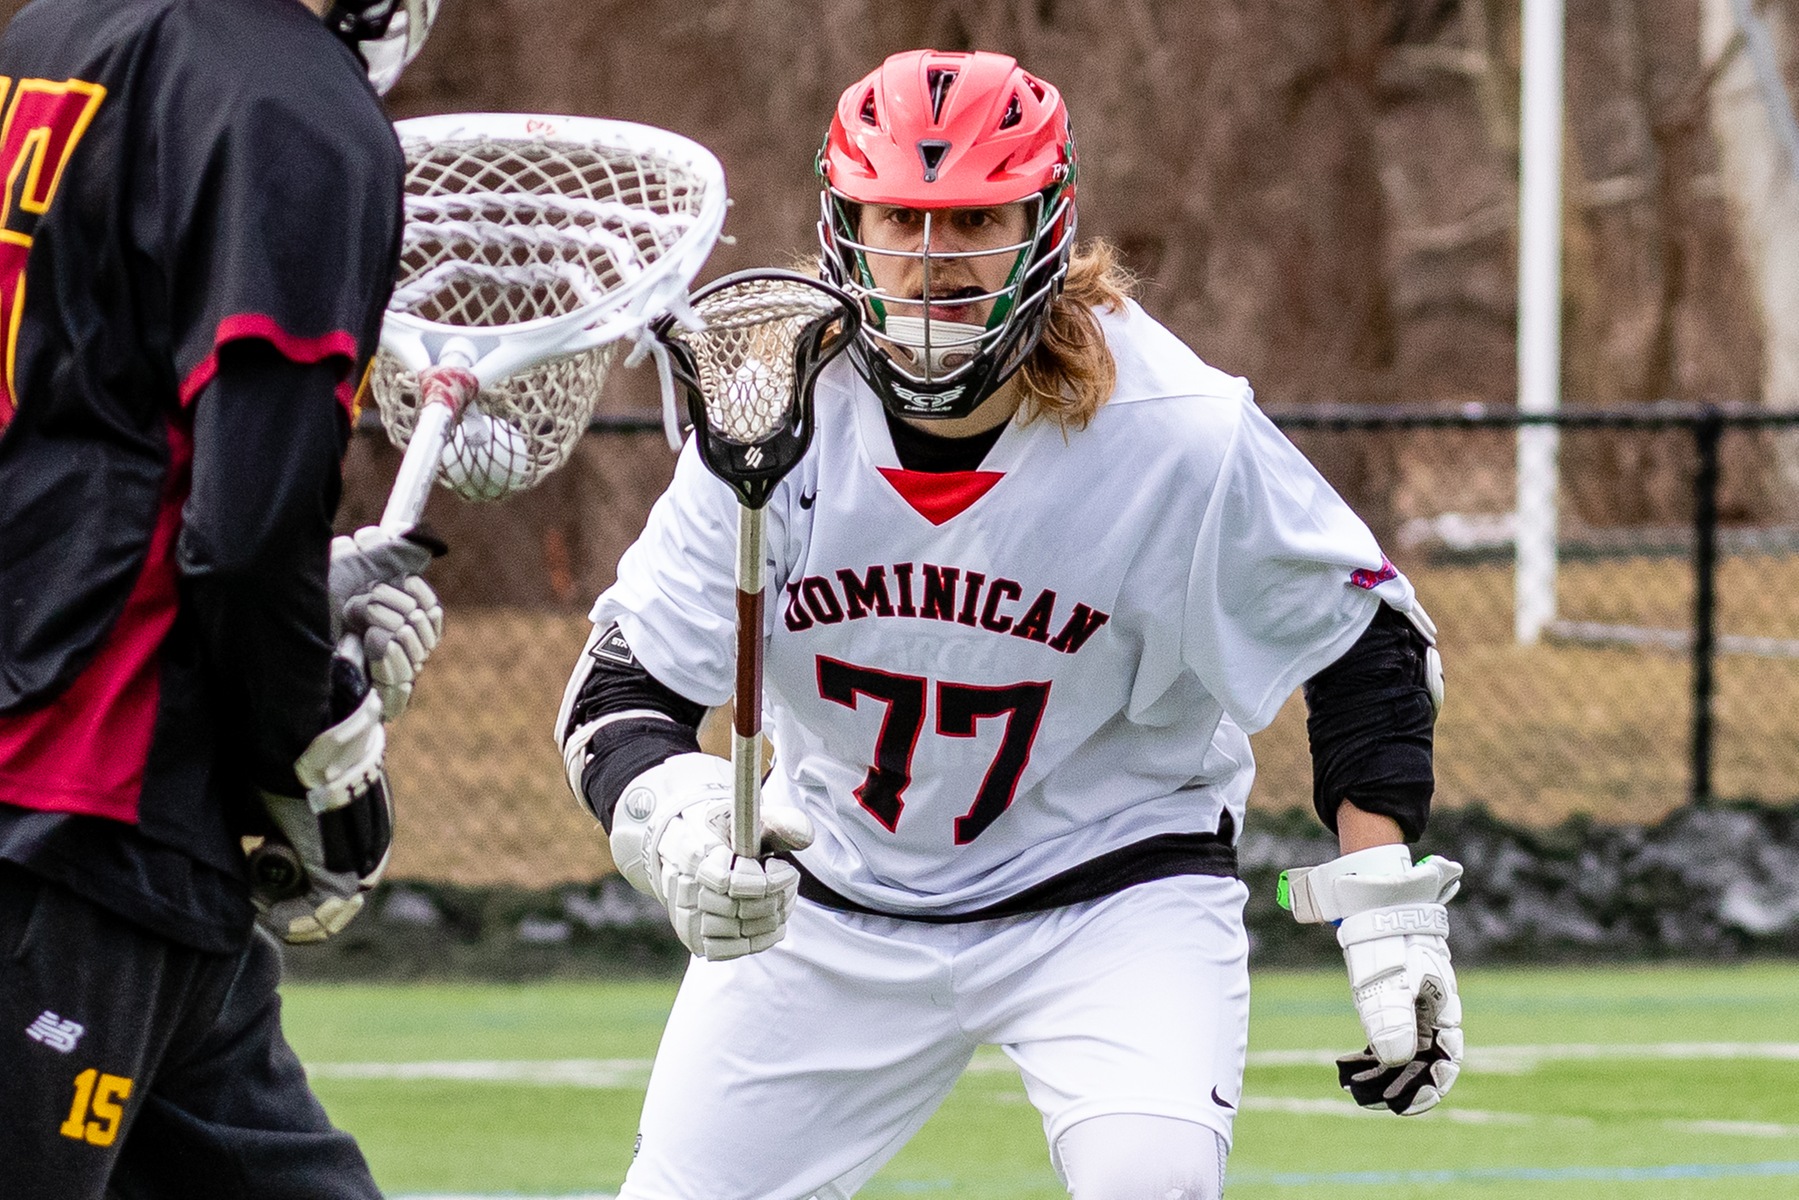 MEN'S LACROSSE DROPS NON-CONFERENCE GAME TO MOLLOY COLLEGE